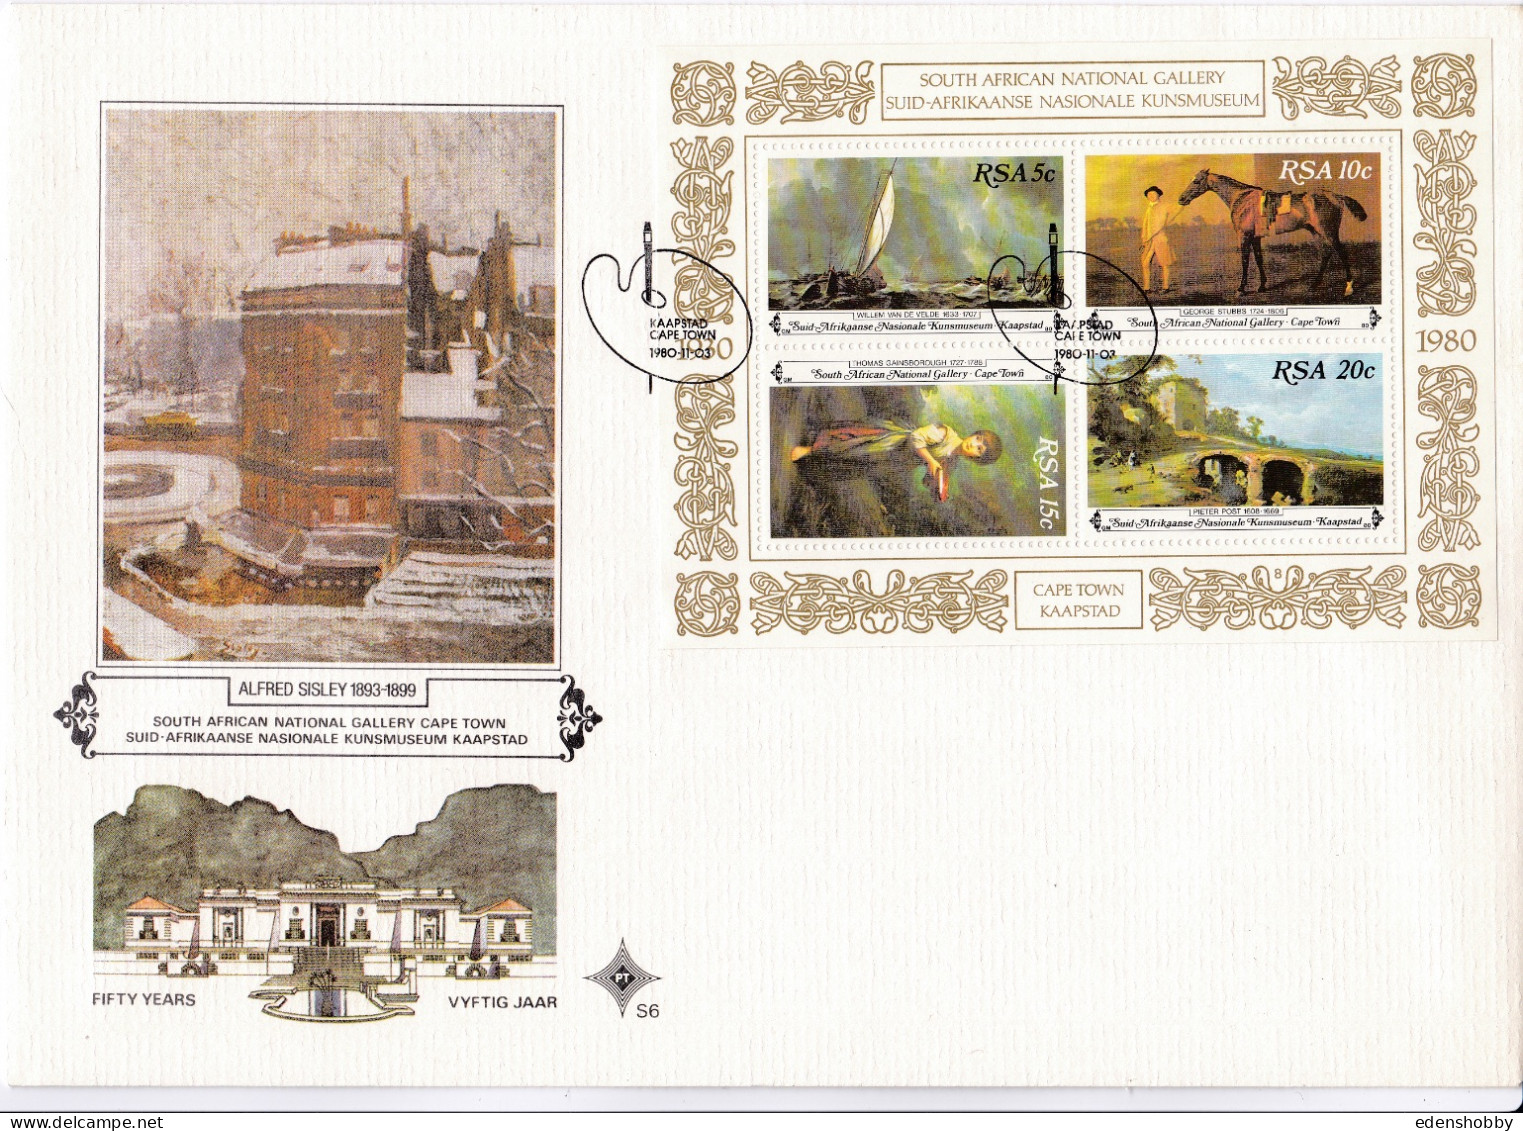 1980 SOUTH AFRICA RSA 8 Official First day Covers  FDC 3.21, S5, 3.22, 3.23, 3.24, 3.25, S6, 3.26